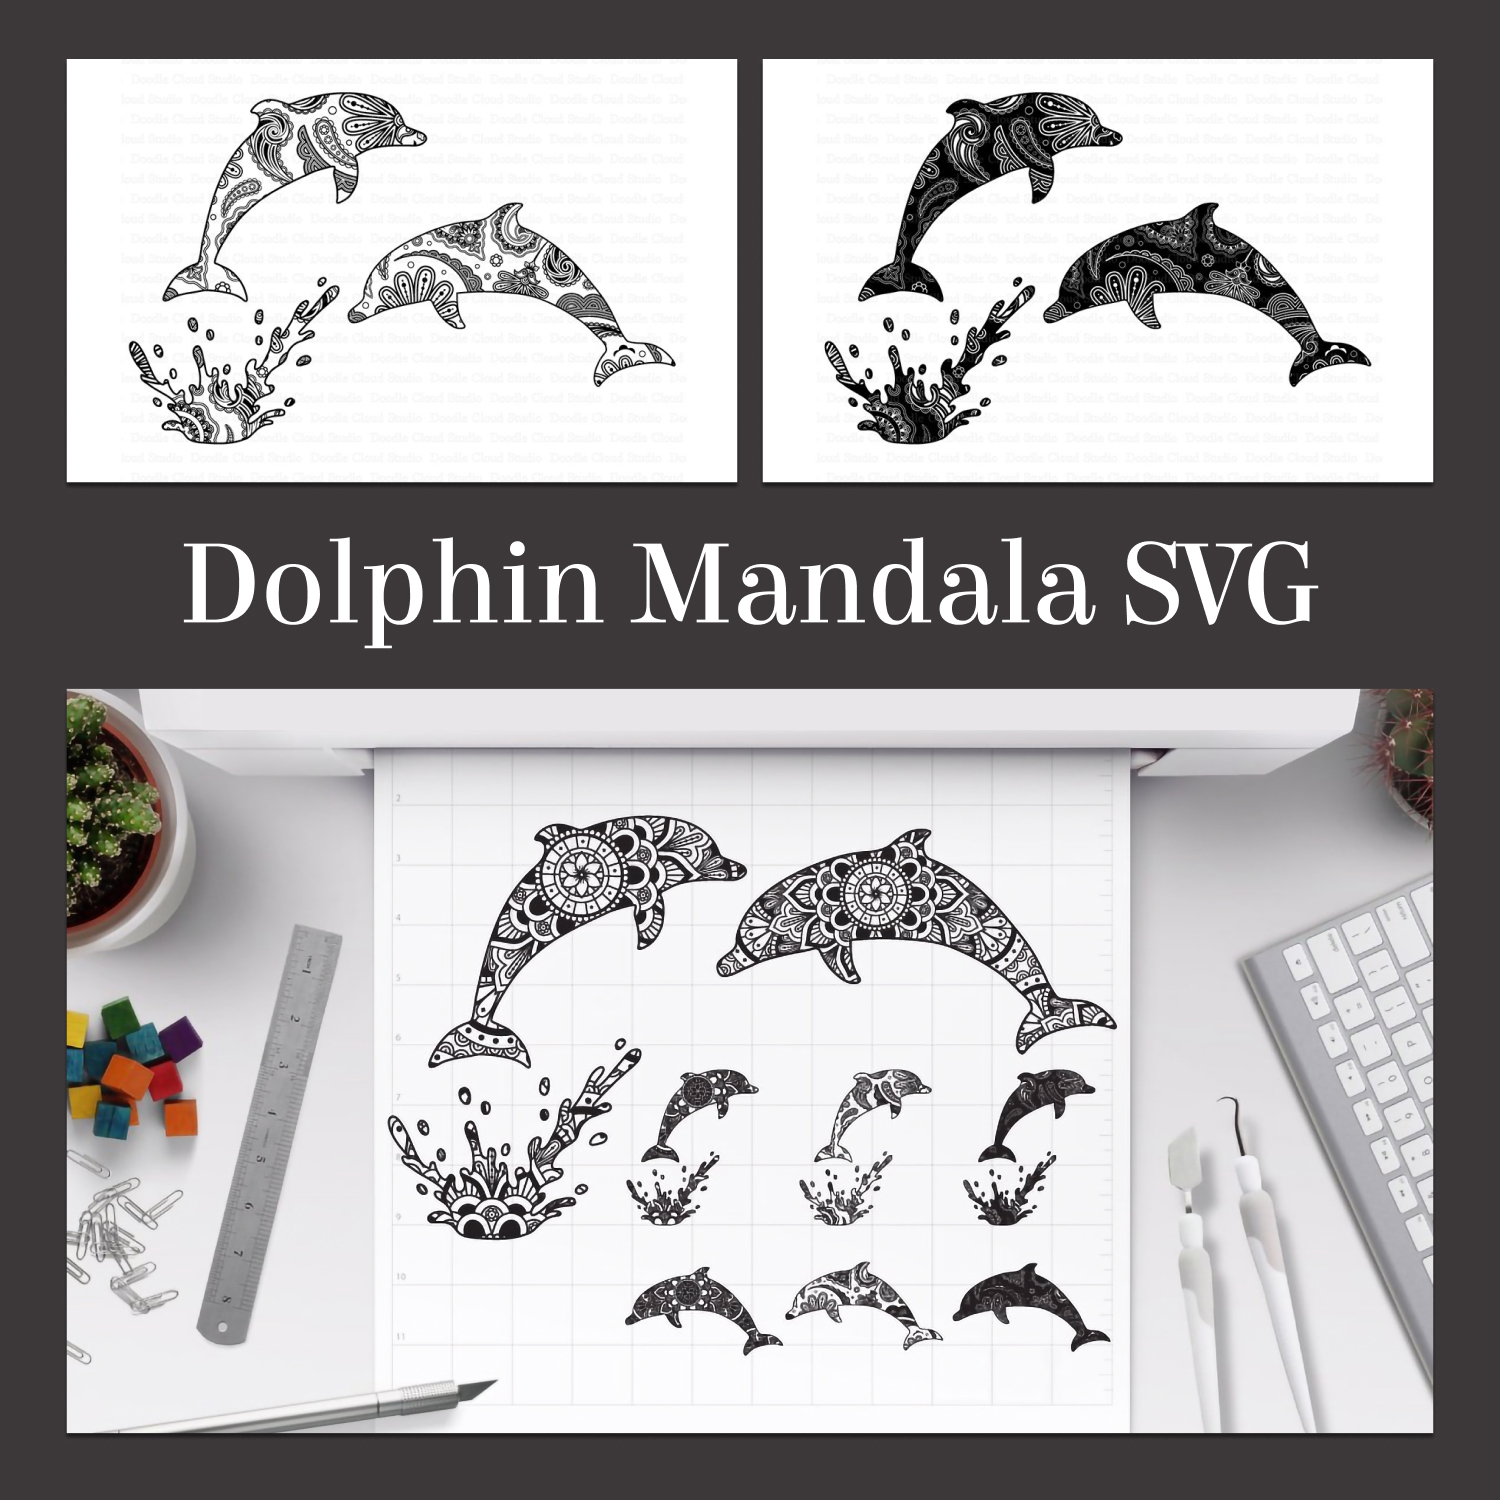 Dolphin stencils are shown on top of a desk.